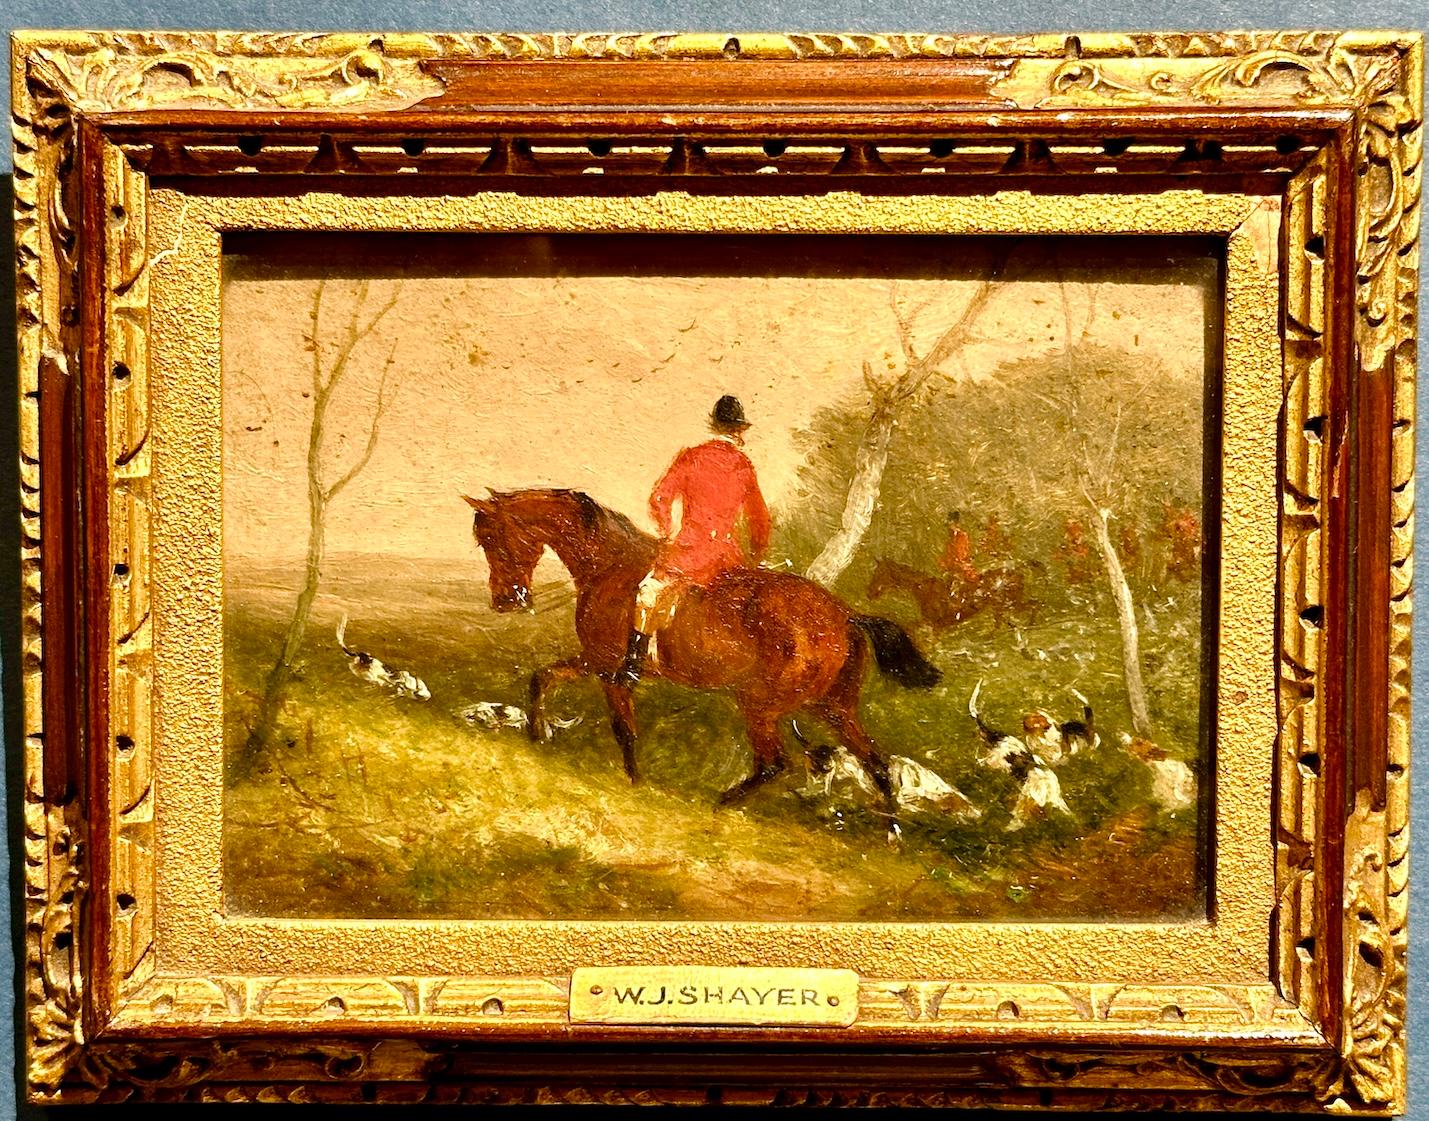 William Joseph Shayer Landscape Painting - 19th century English fox hunter on his horse oil in a landscape